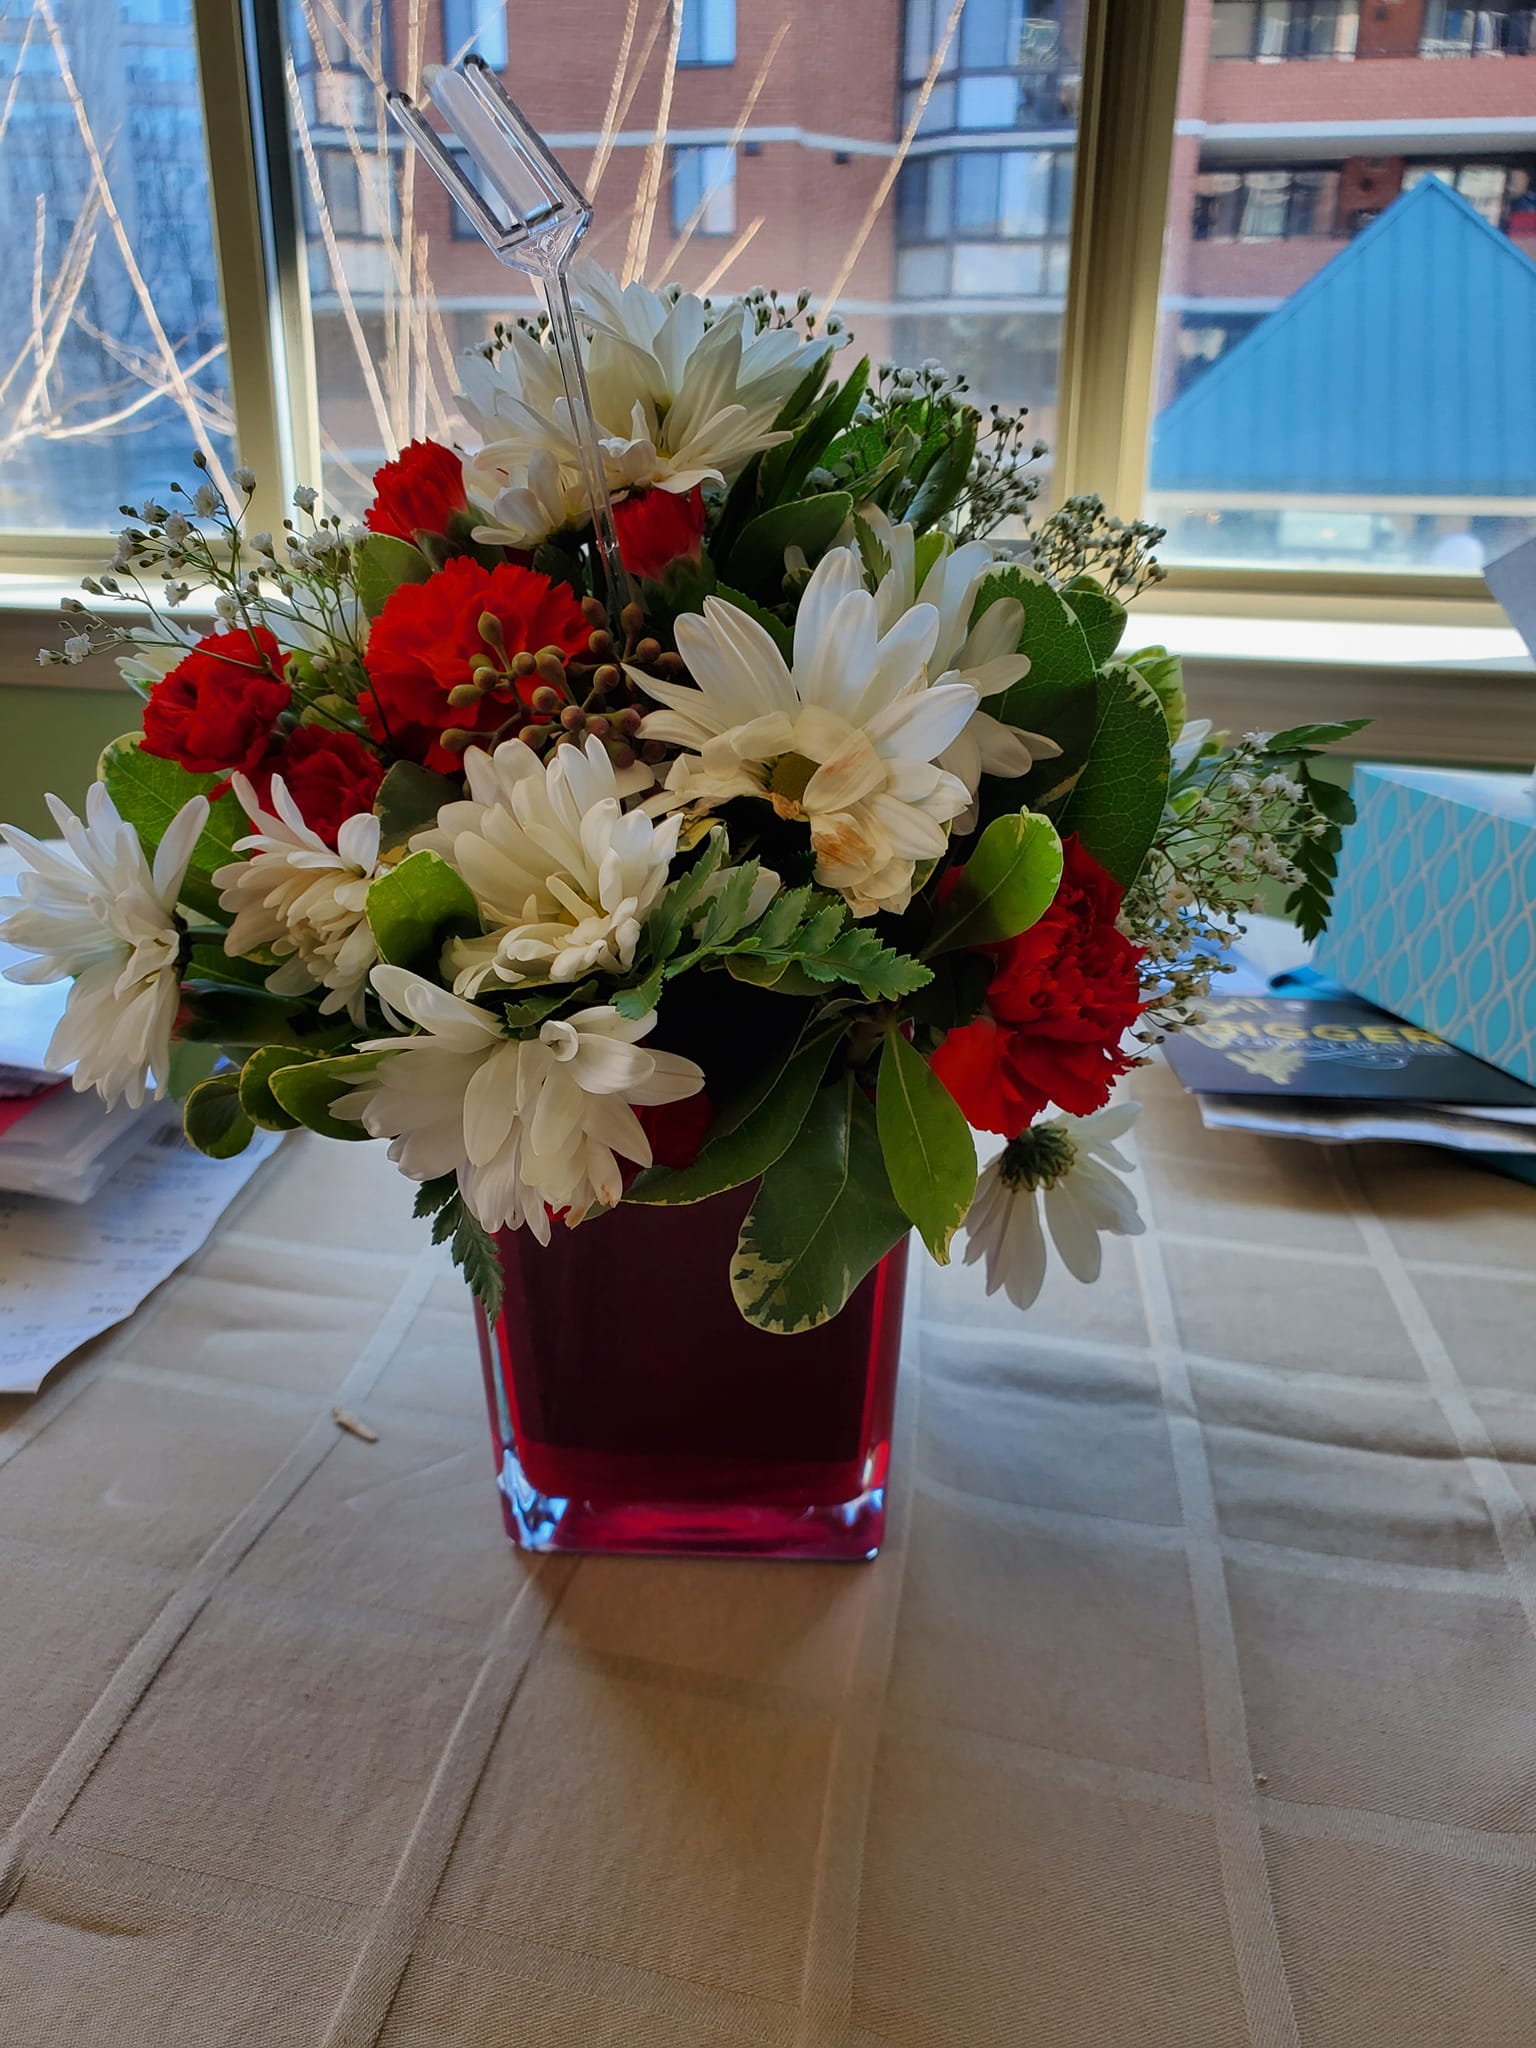 Fabulous flowers for Valentine’s Day from Tony, 2-22.